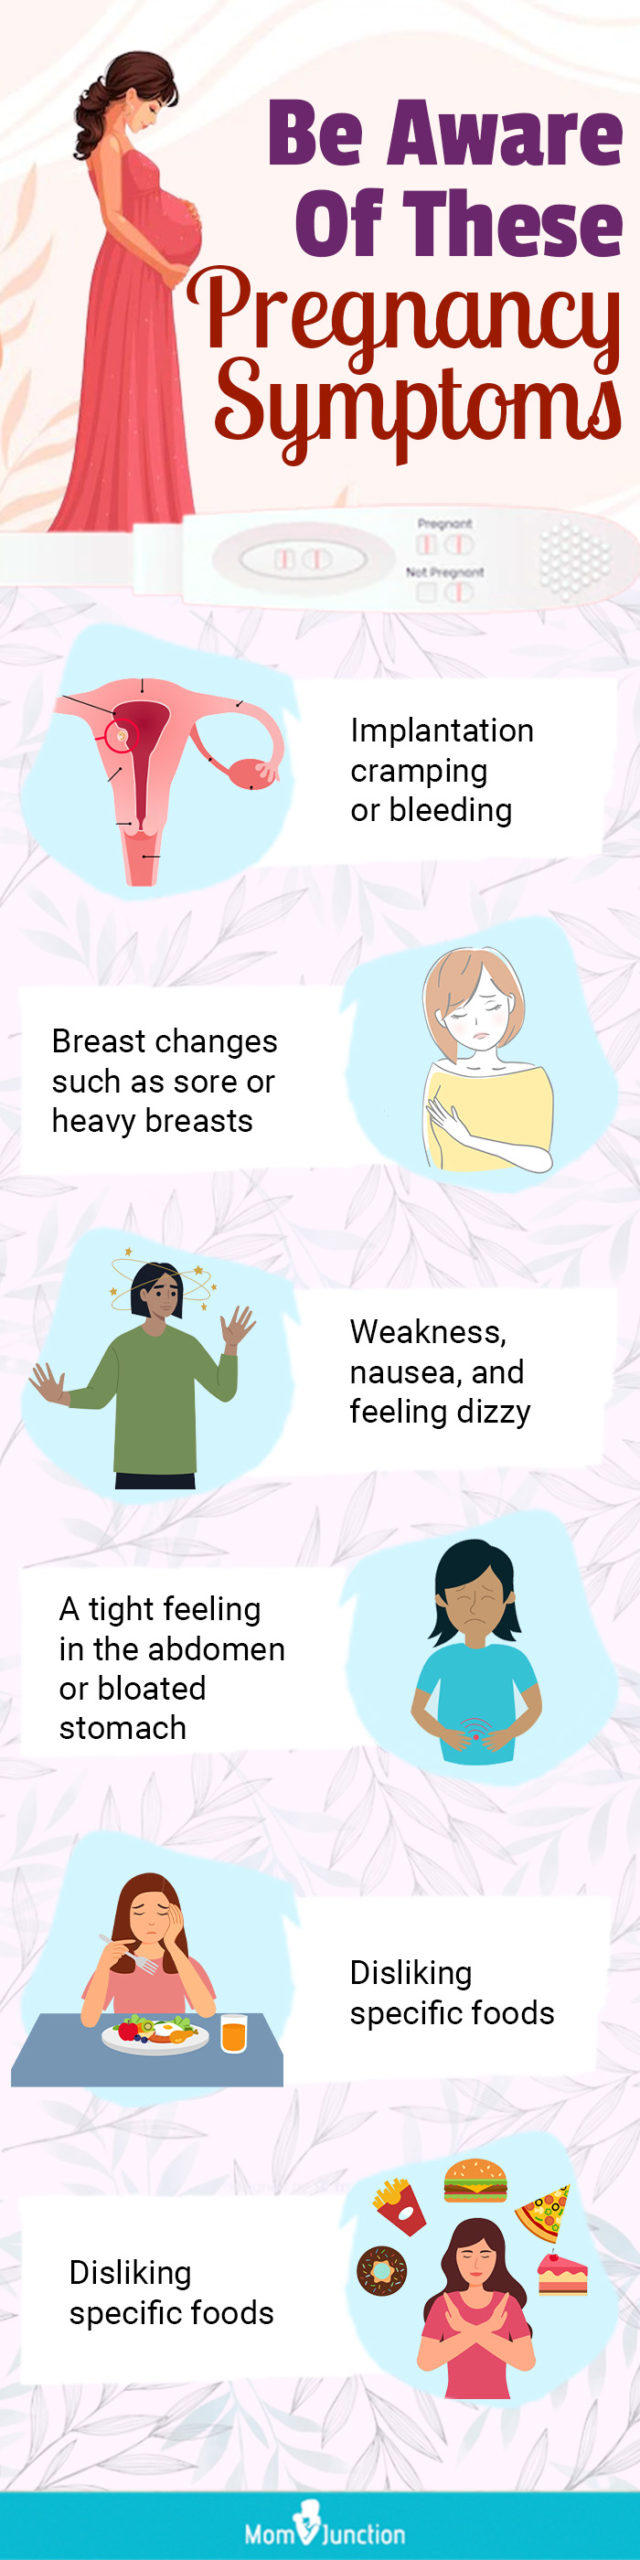 Pregnancy Signs and Symptoms